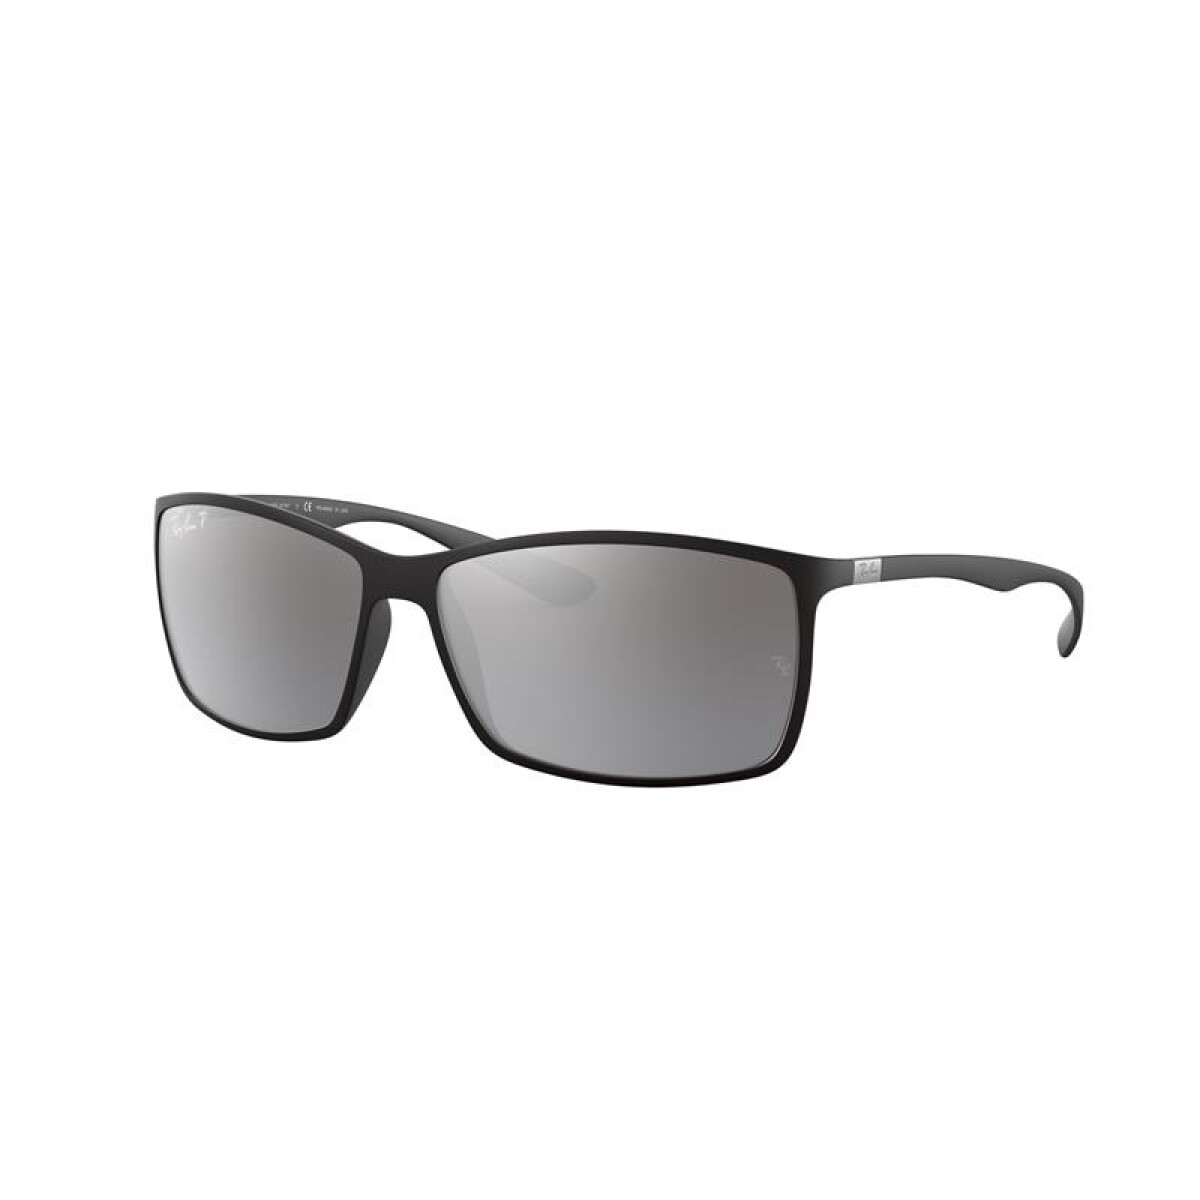 Ray Ban Rb4179 - 601-s/82 